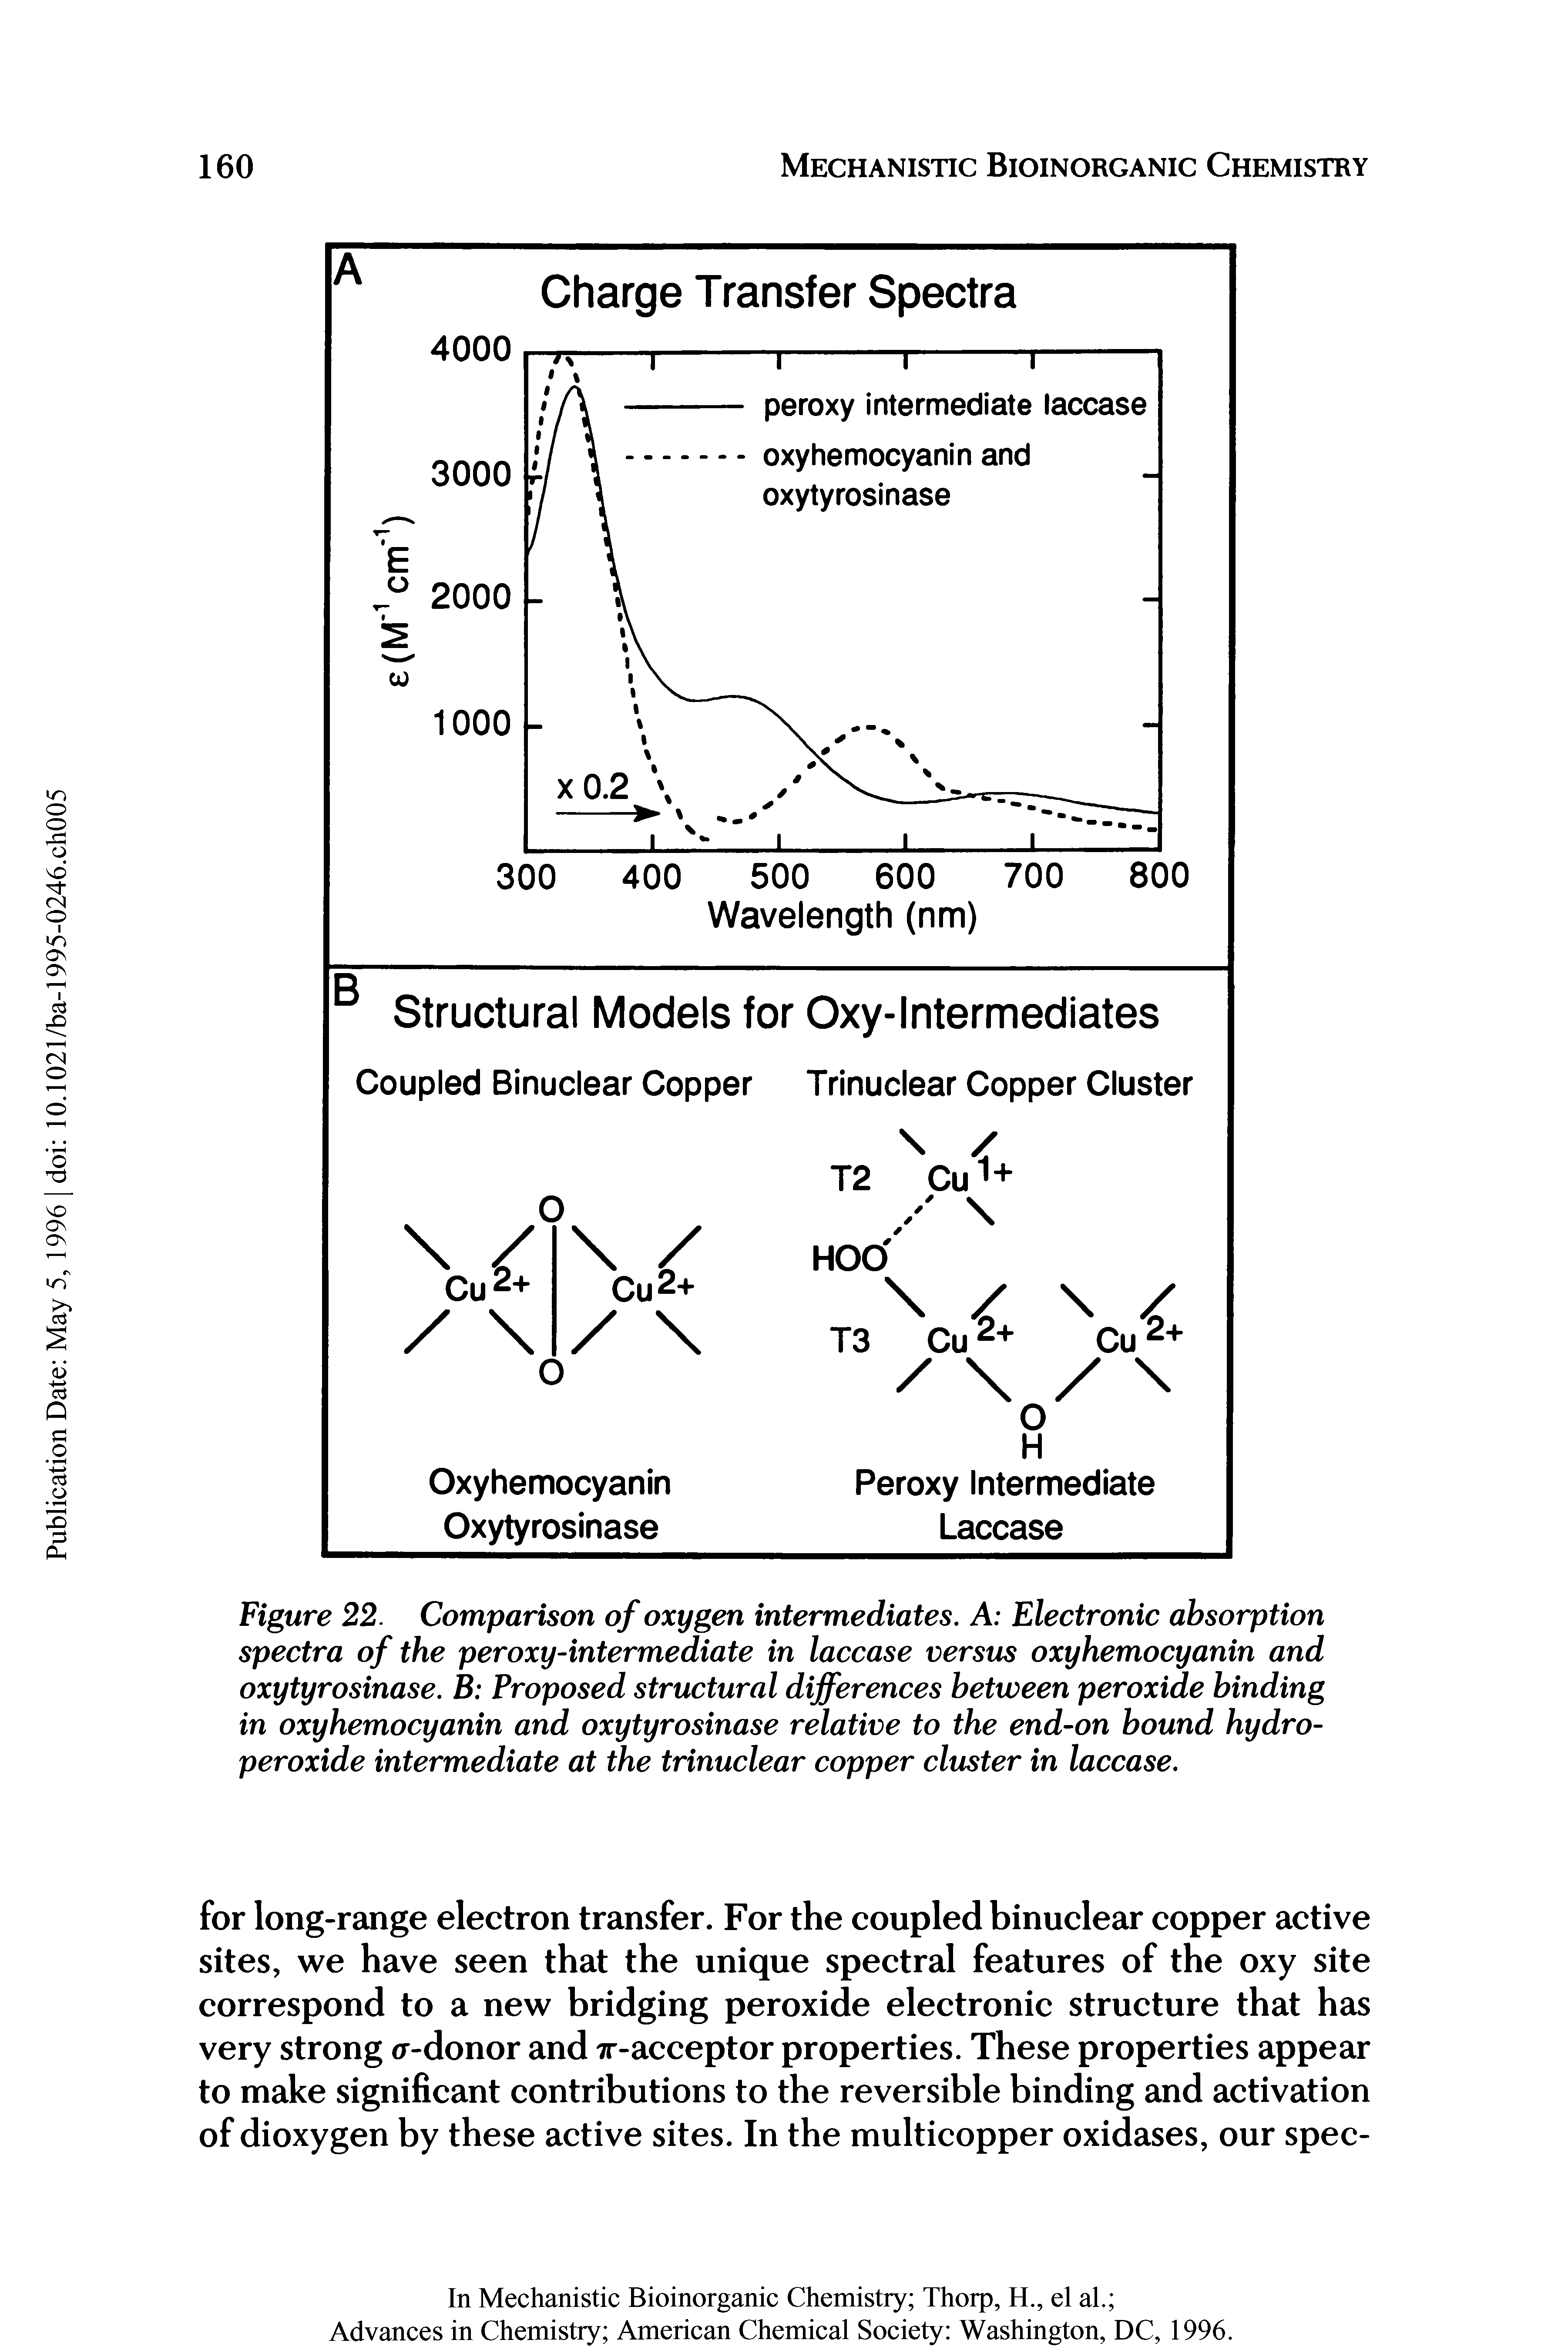 Figure 22. Comparison of oxygen intermediates. A Electronic absorption spectra of the peroxy-intermediate in laccase versus oxyhemocyanin and oxytyrosinase. B Proposed structural differences between peroxide binding in oxyhemocyanin and oxytyrosinase relative to the end-on bound hydroperoxide intermediate at the trinuclear copper cluster in laccase.